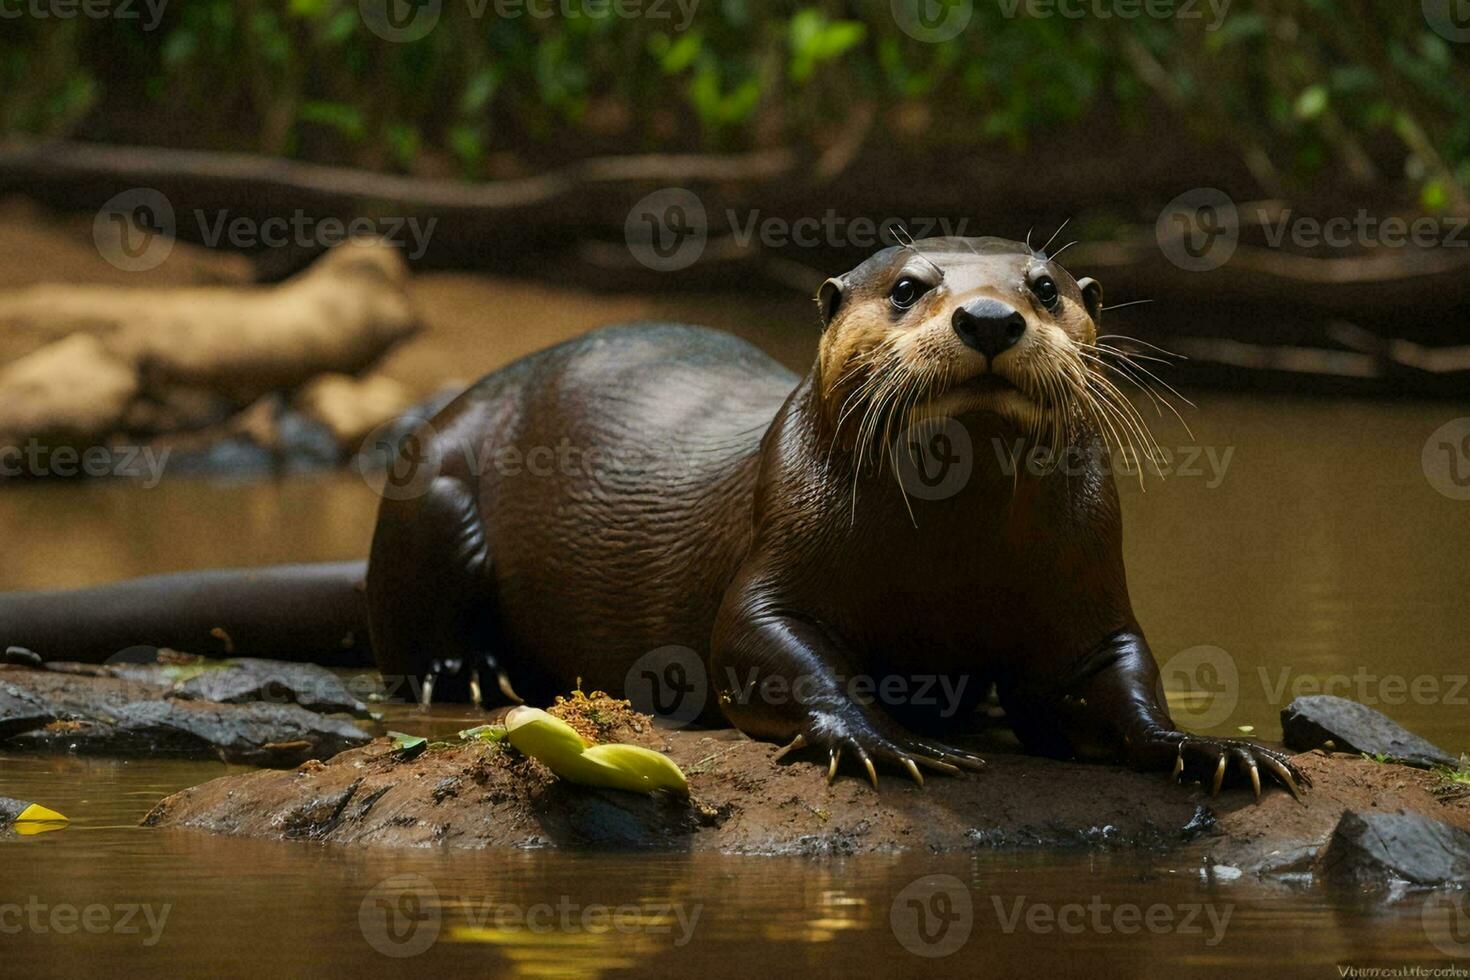 a giant river otter feeding in its natural habitat in the Pantanal region of Brazil. photo